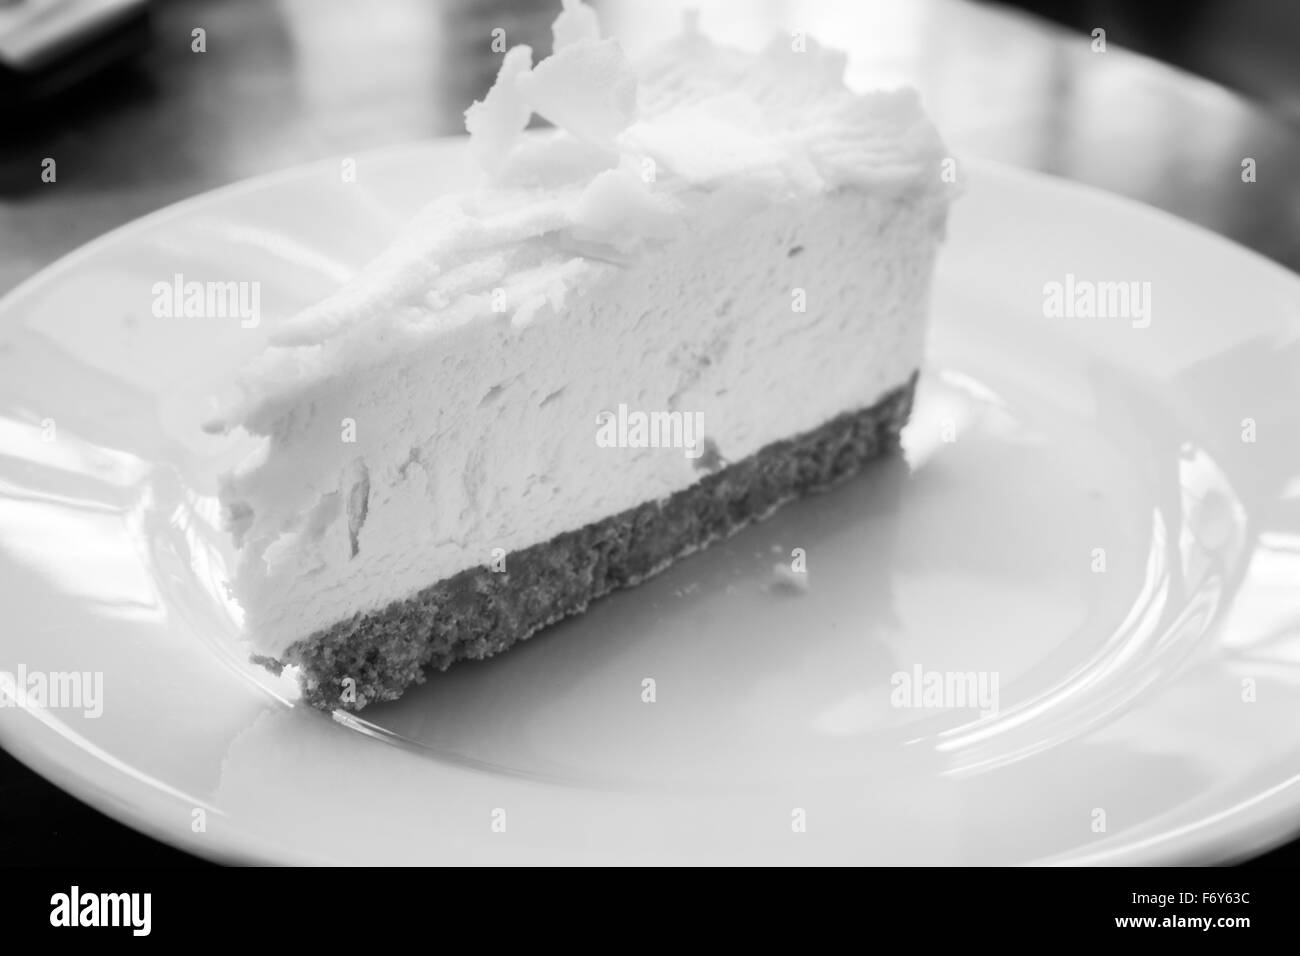 slice of cheesecake on a white plate Stock Photo